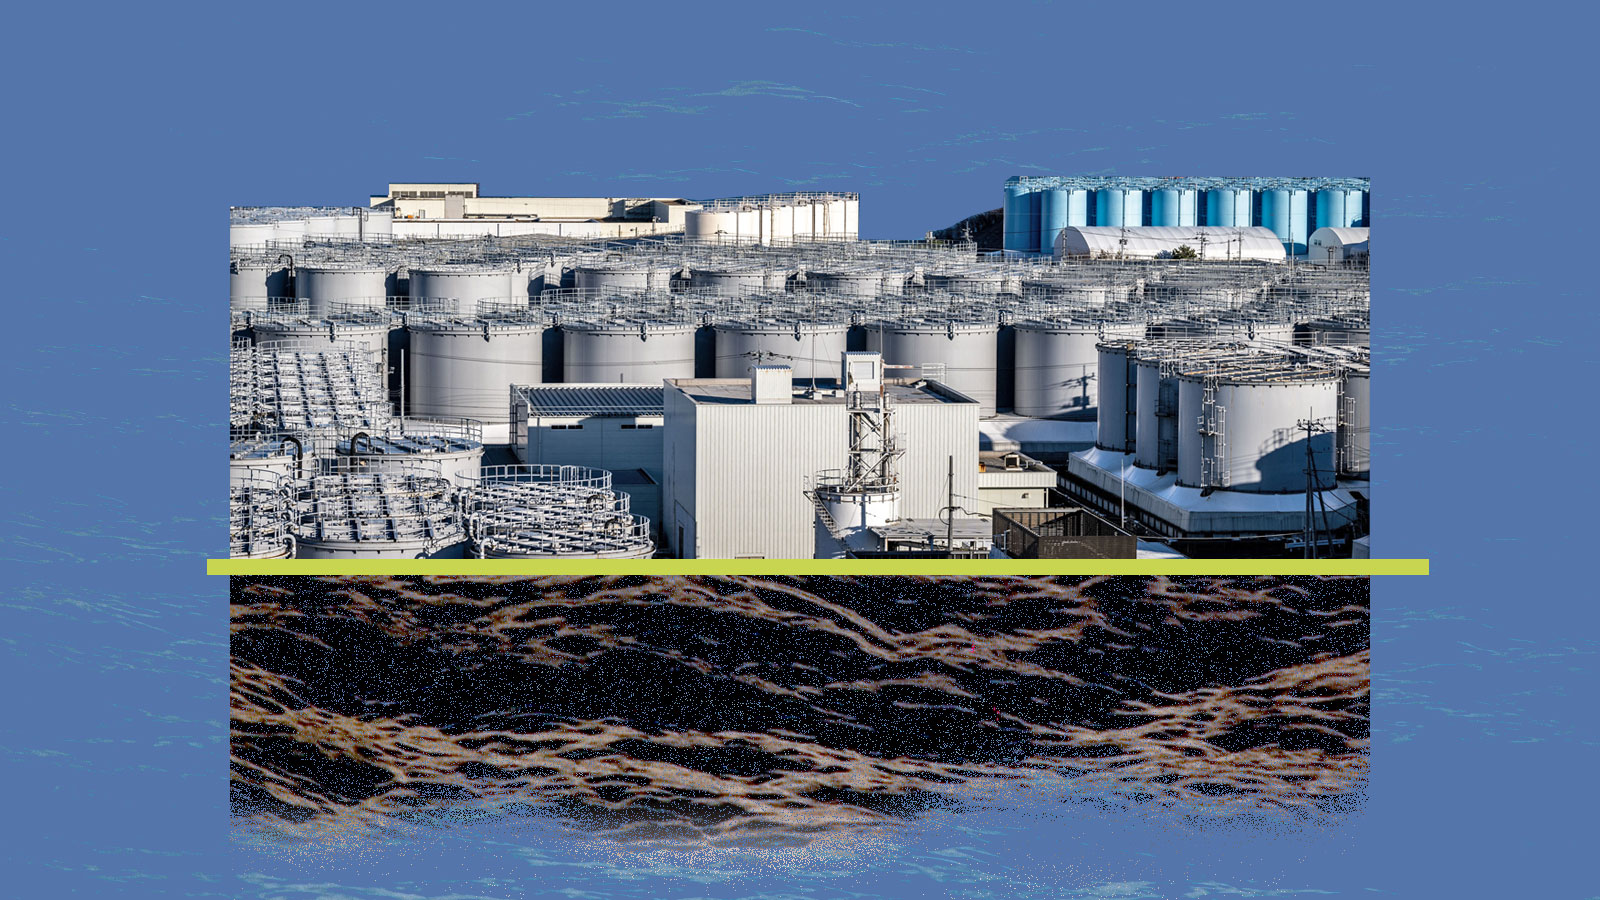 Digital collage: Storage tanks at Fukushima Nuclear Plant with dark liquid leaking out from underneath